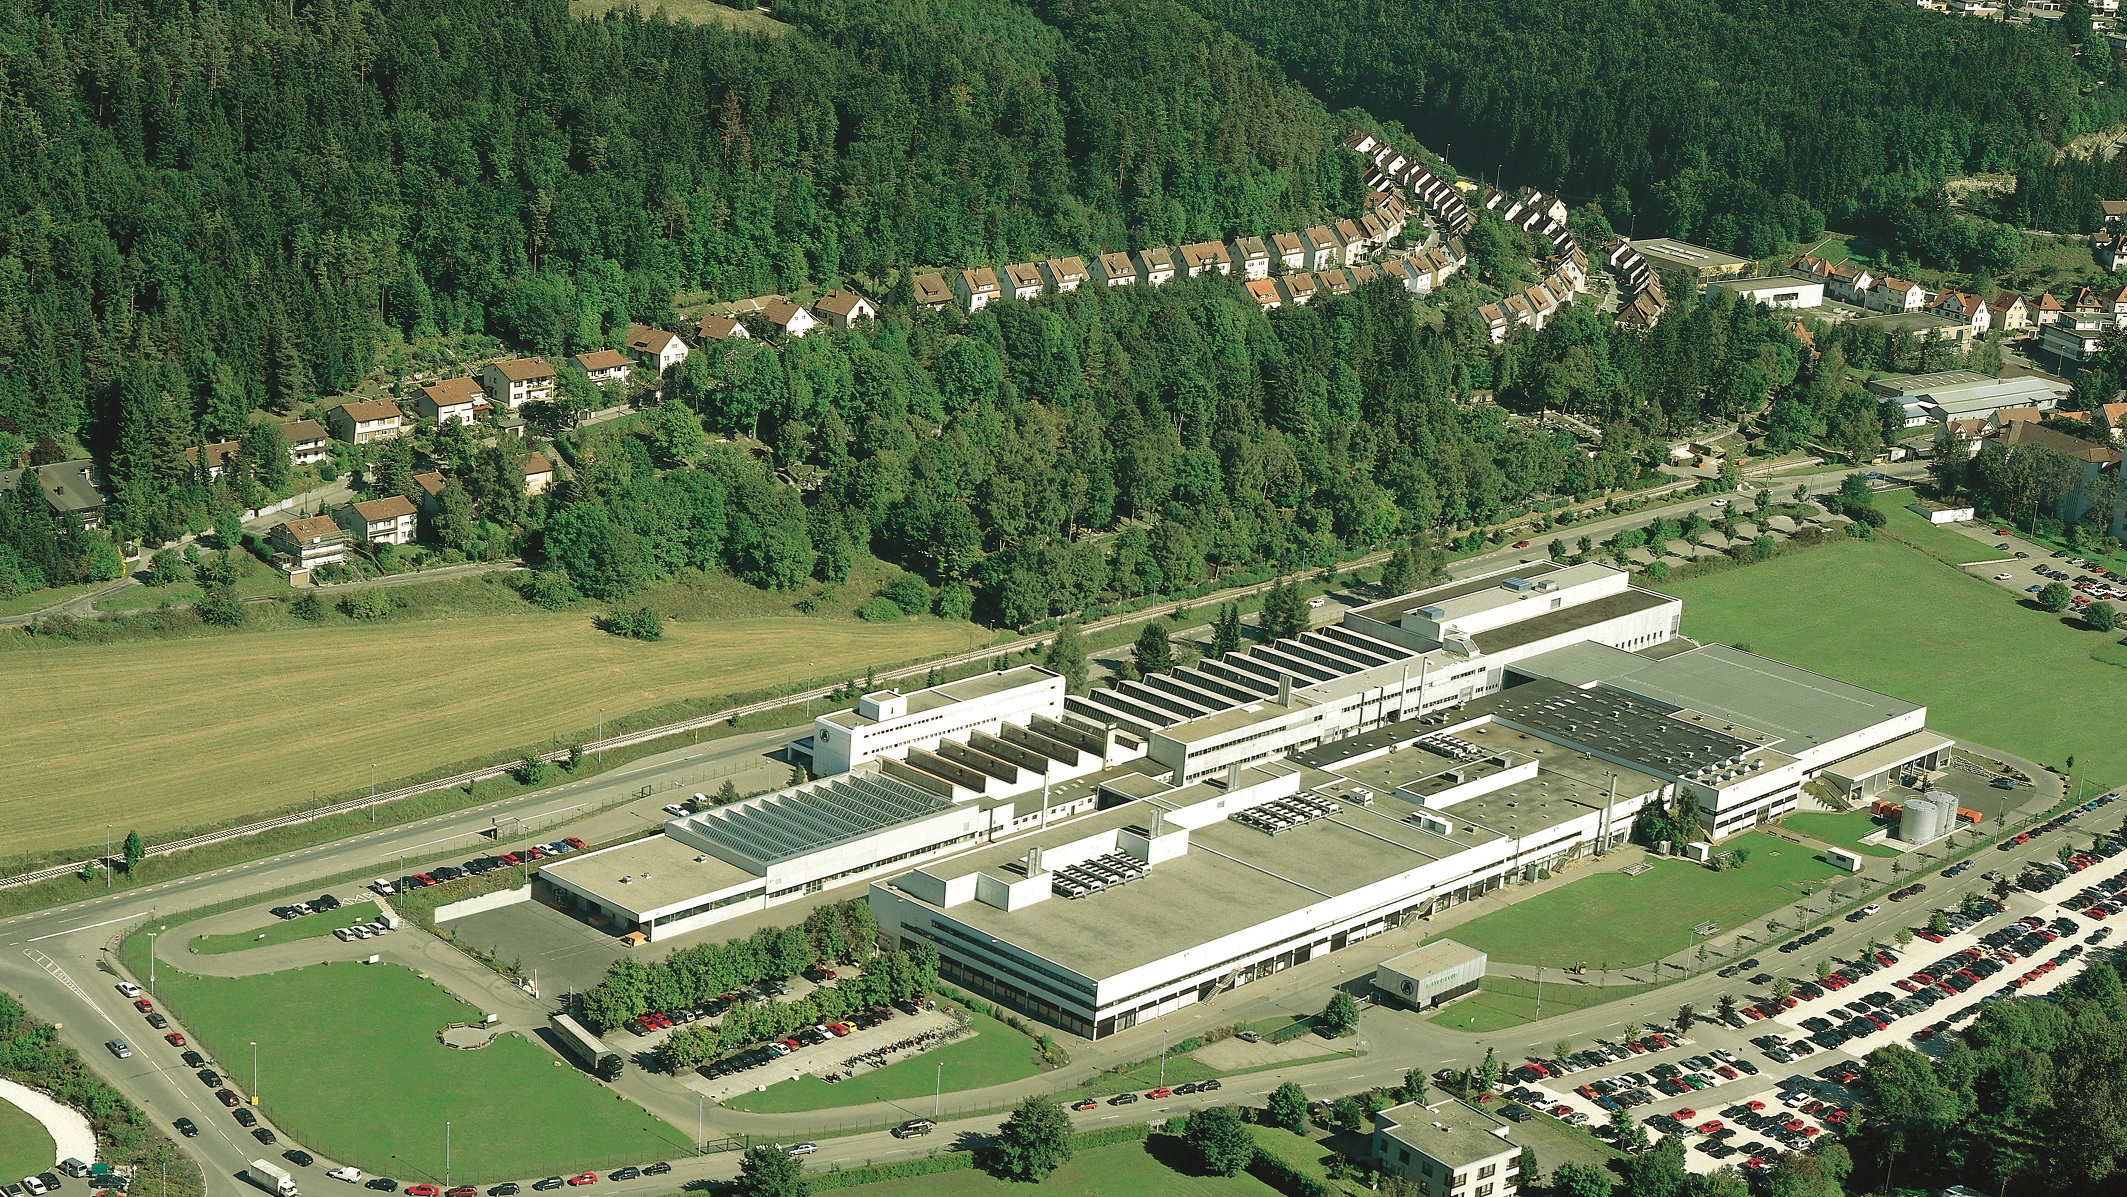 An aerial photo of the company’s headquarters ”“ the home of Mayer & Cie. for over a century. At present, around 330 people are employed here in production, development and administration.